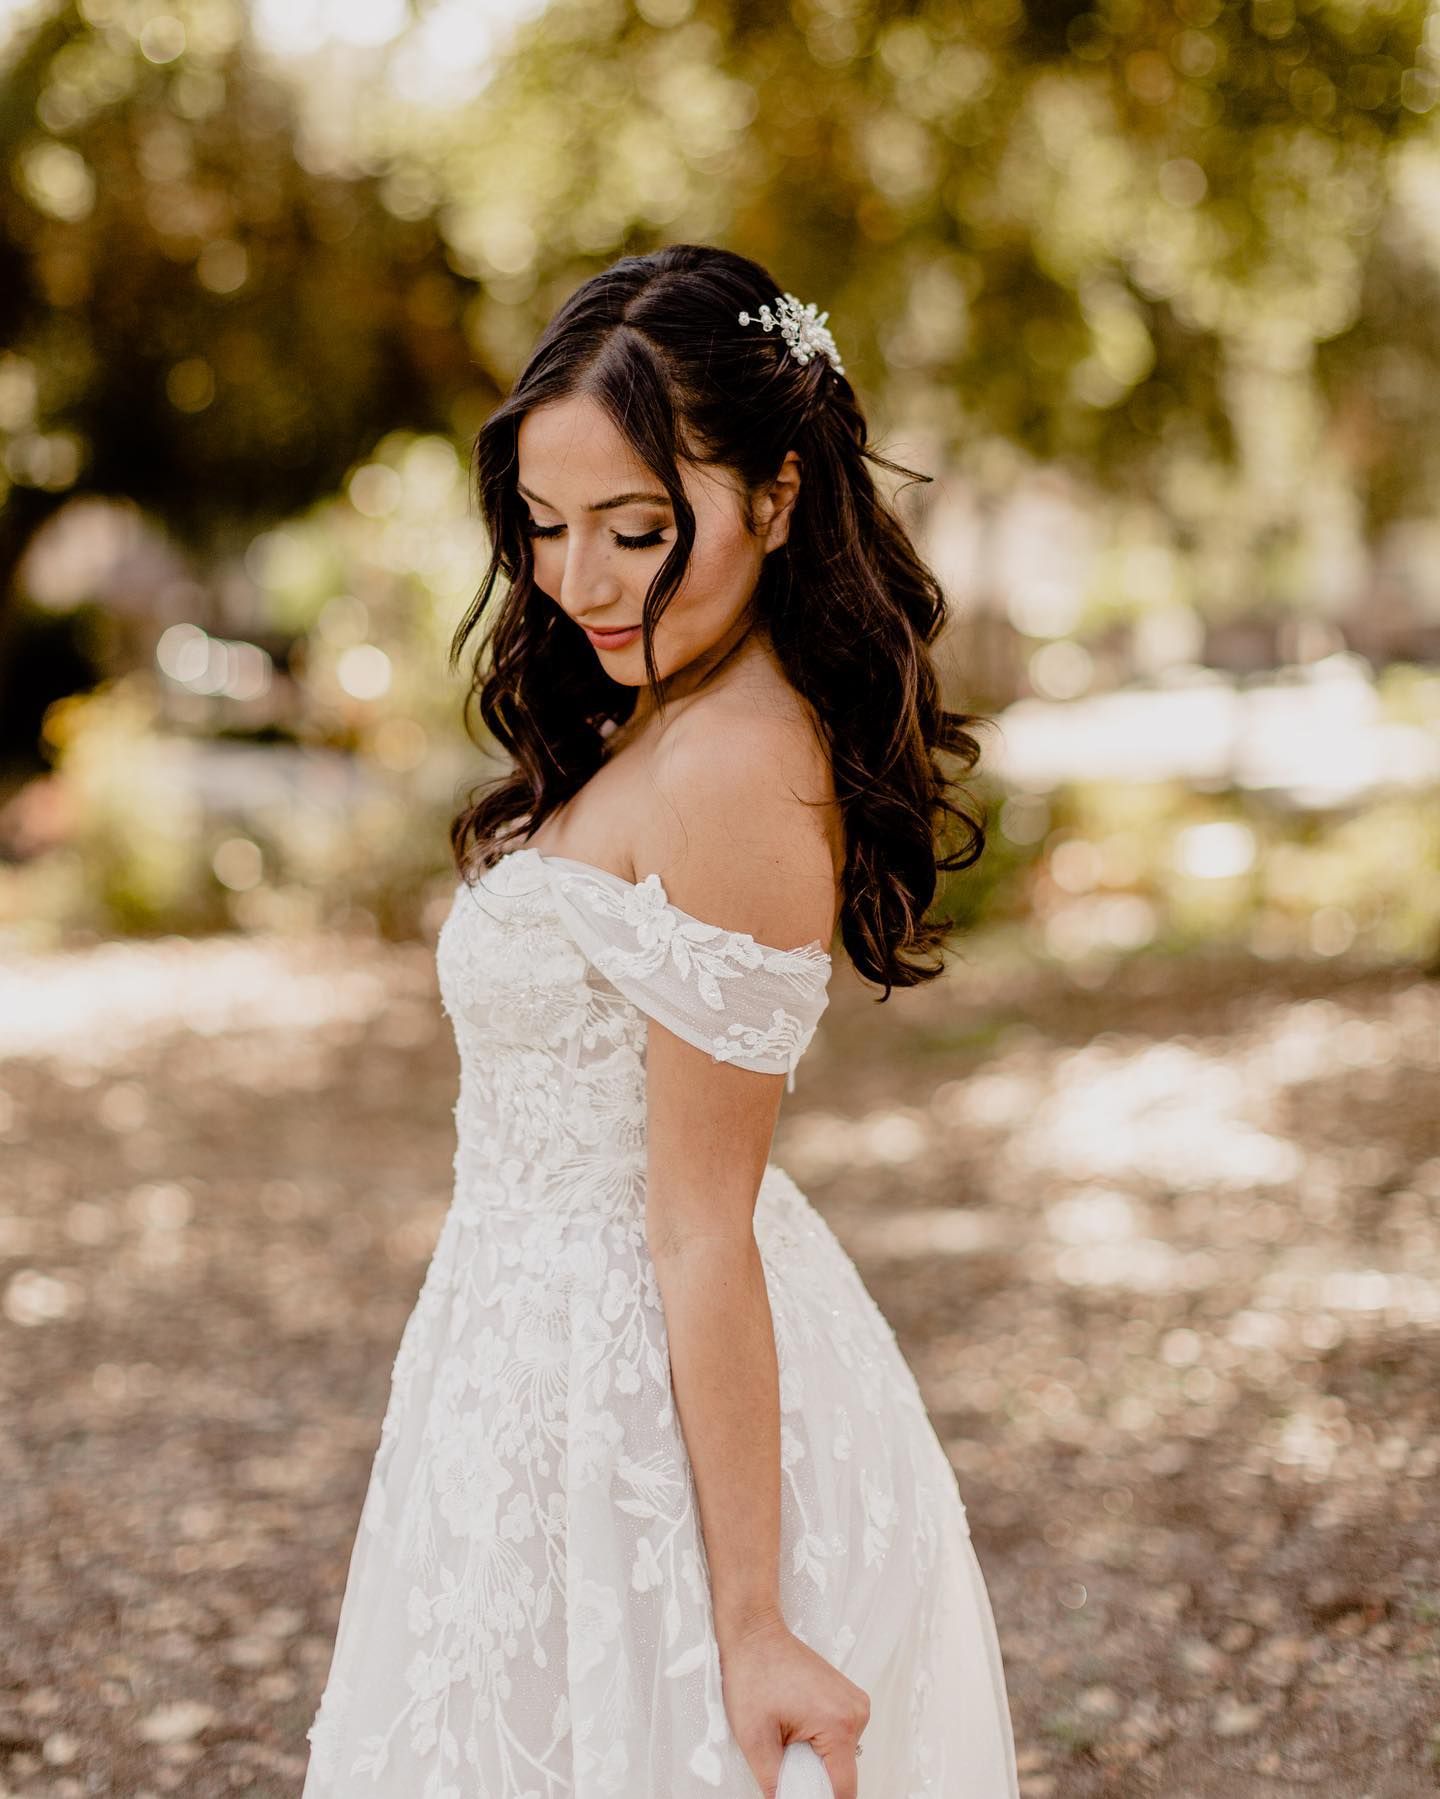 Friday Favs: How to Customize Your Wedding Dress - Rustic Wedding Chic